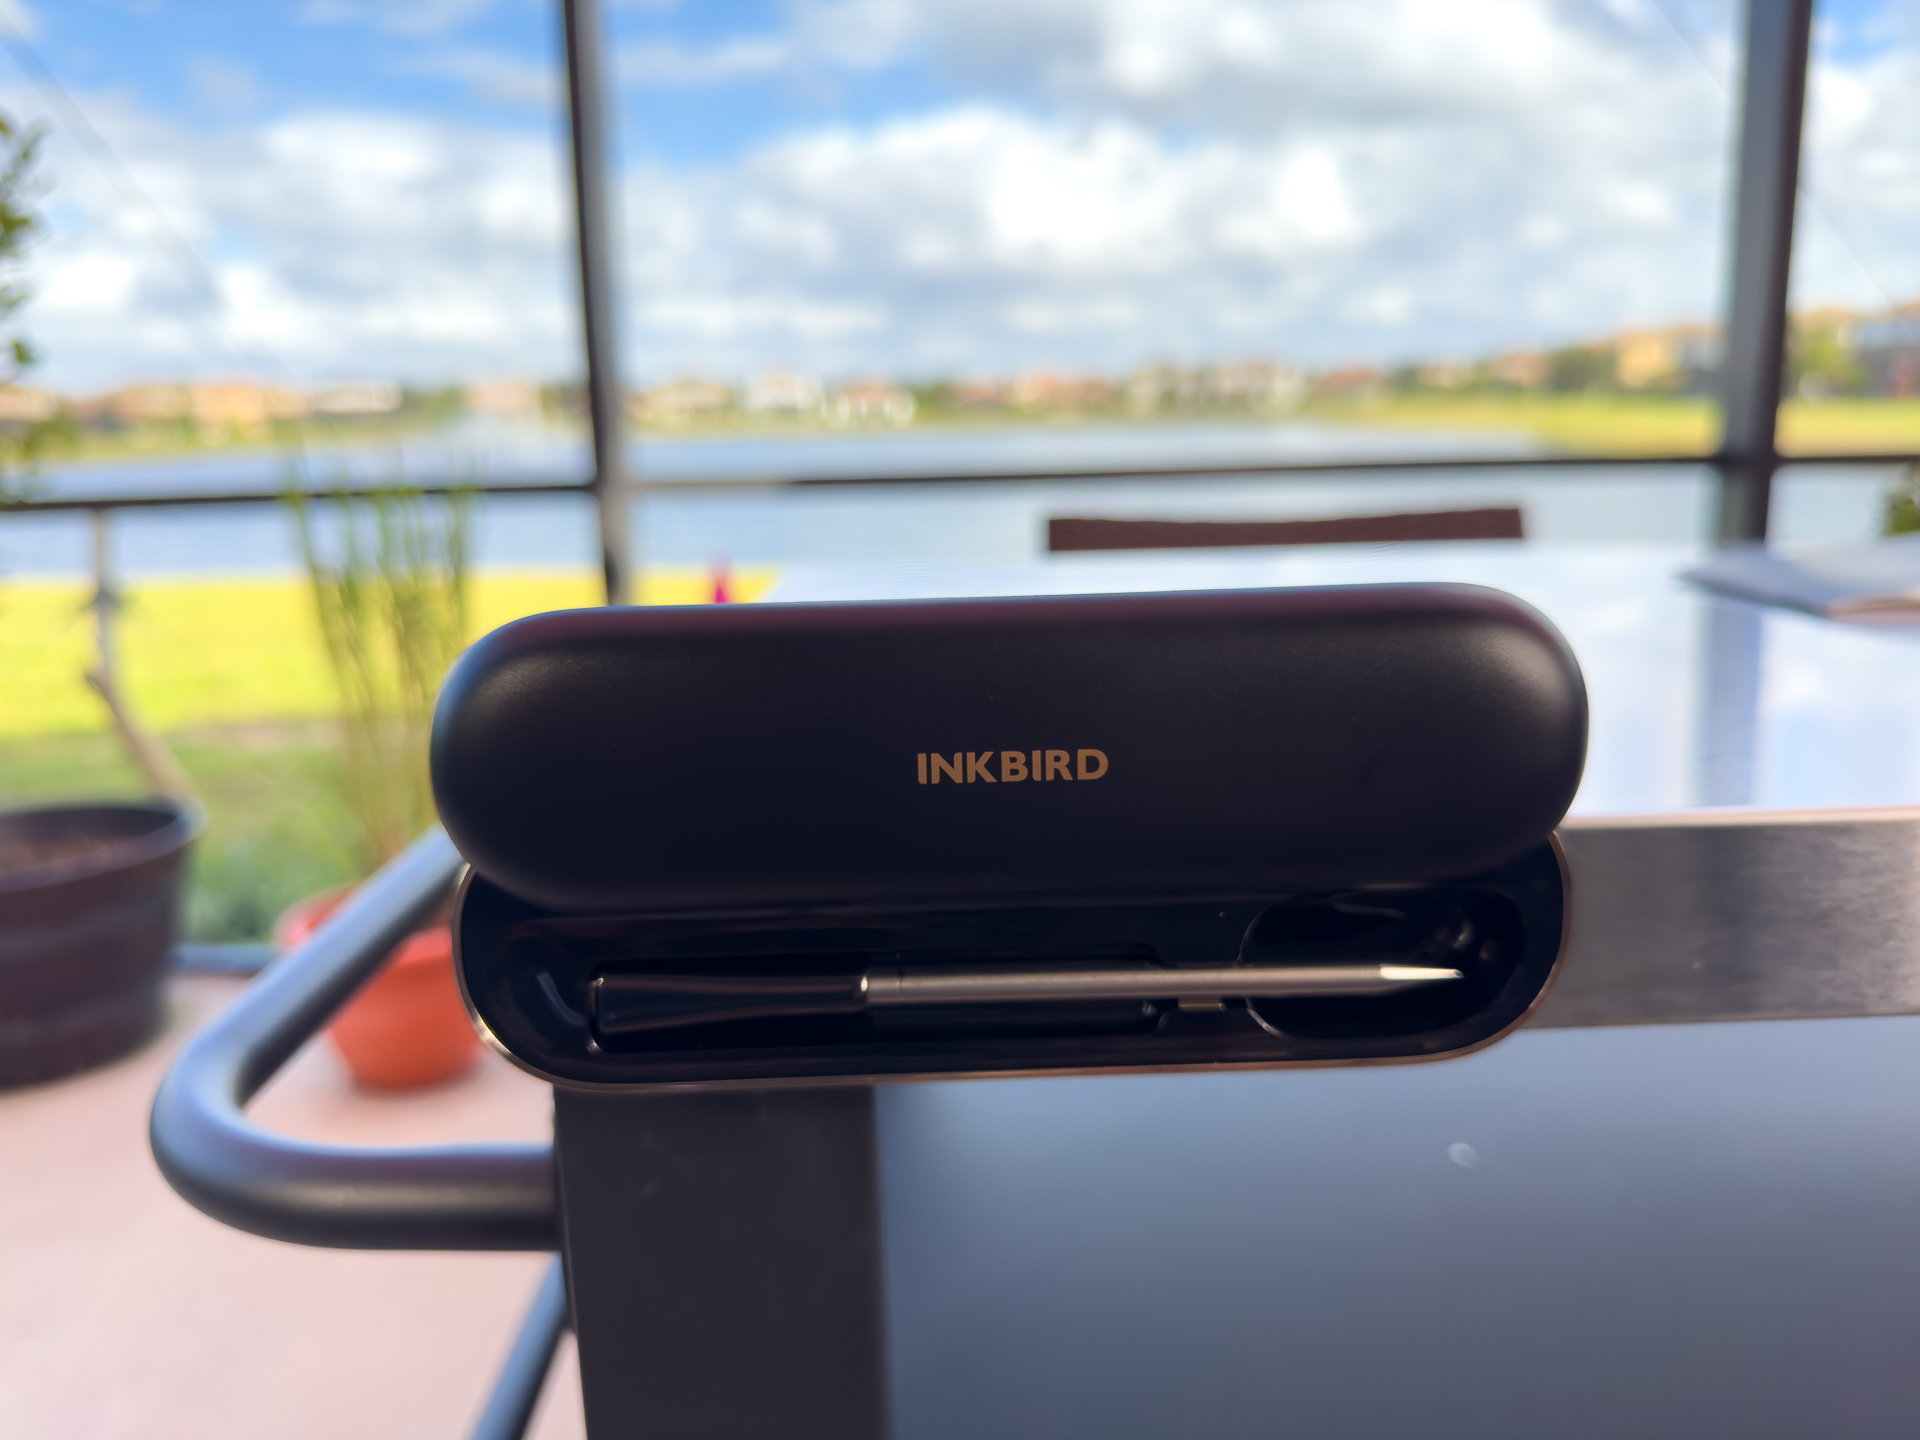 INKBIRD INT-11P-B Wireless Meat Thermometer Review & Test - Share & Tips -  INKBIRD Community